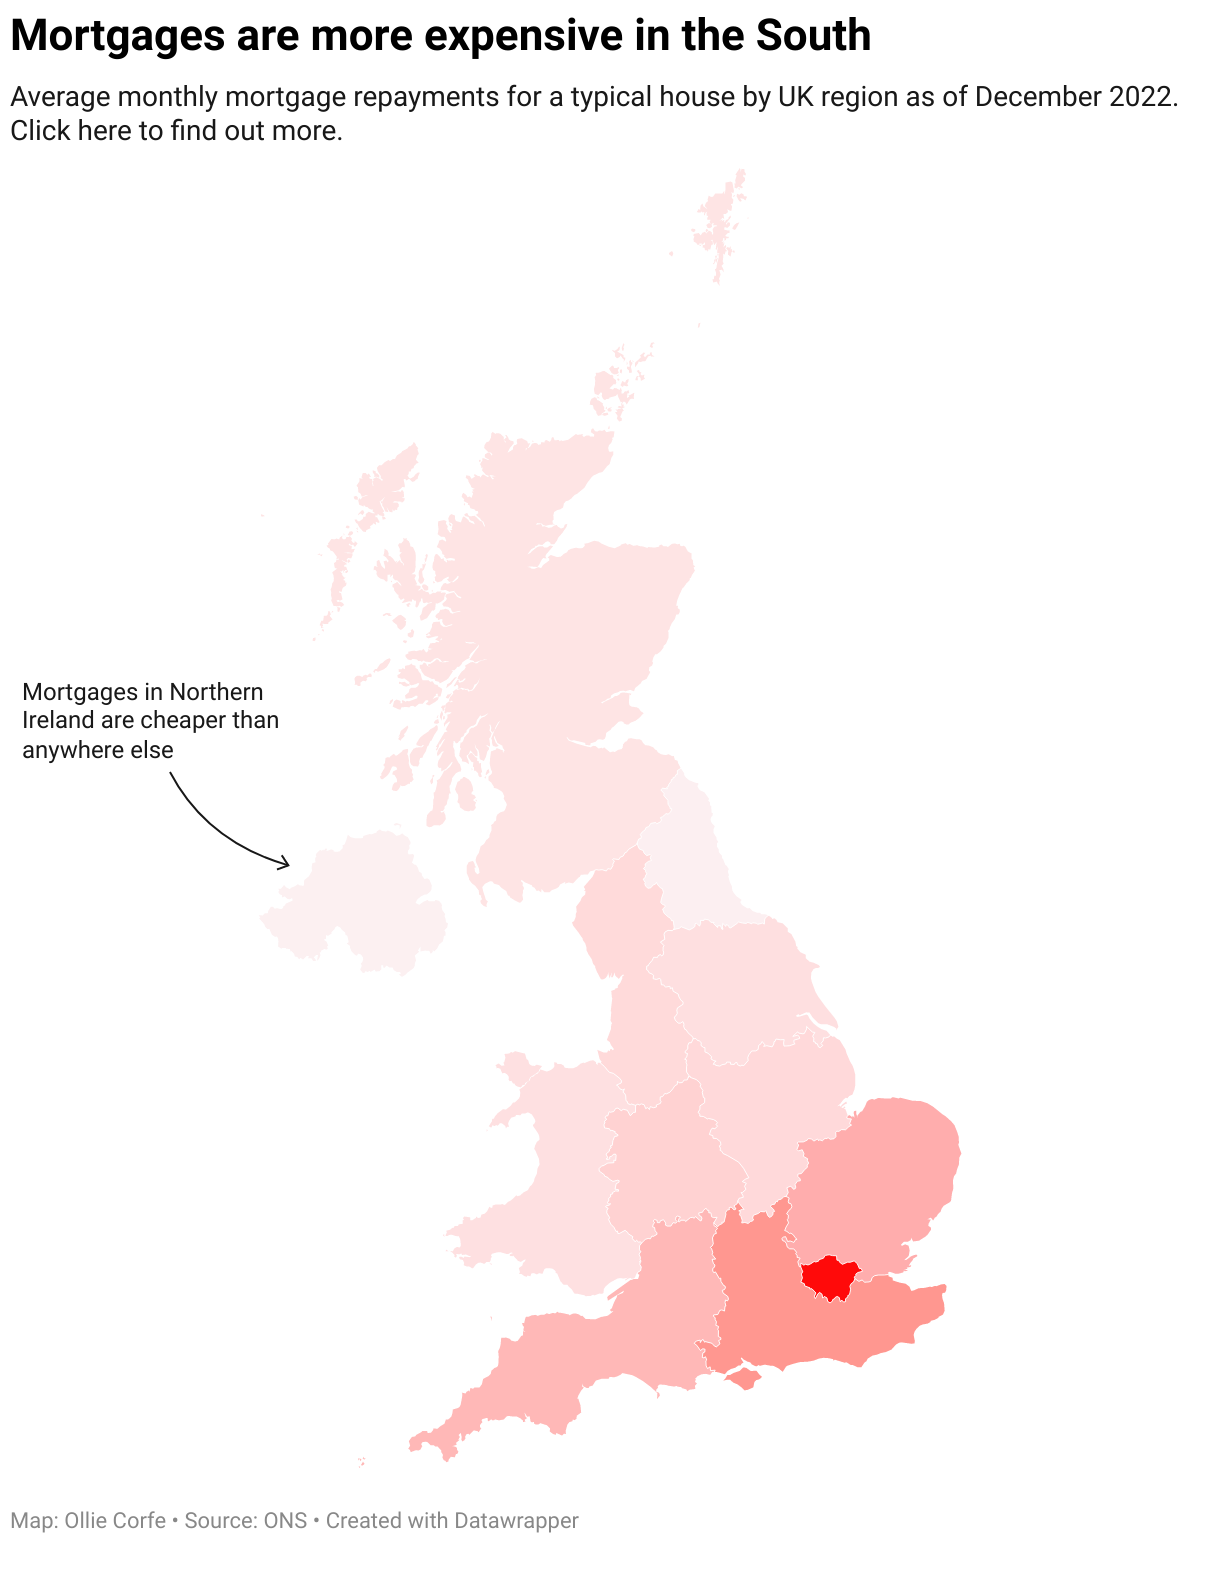 Map displaying the average monthly mortgage repayment in each UK region.